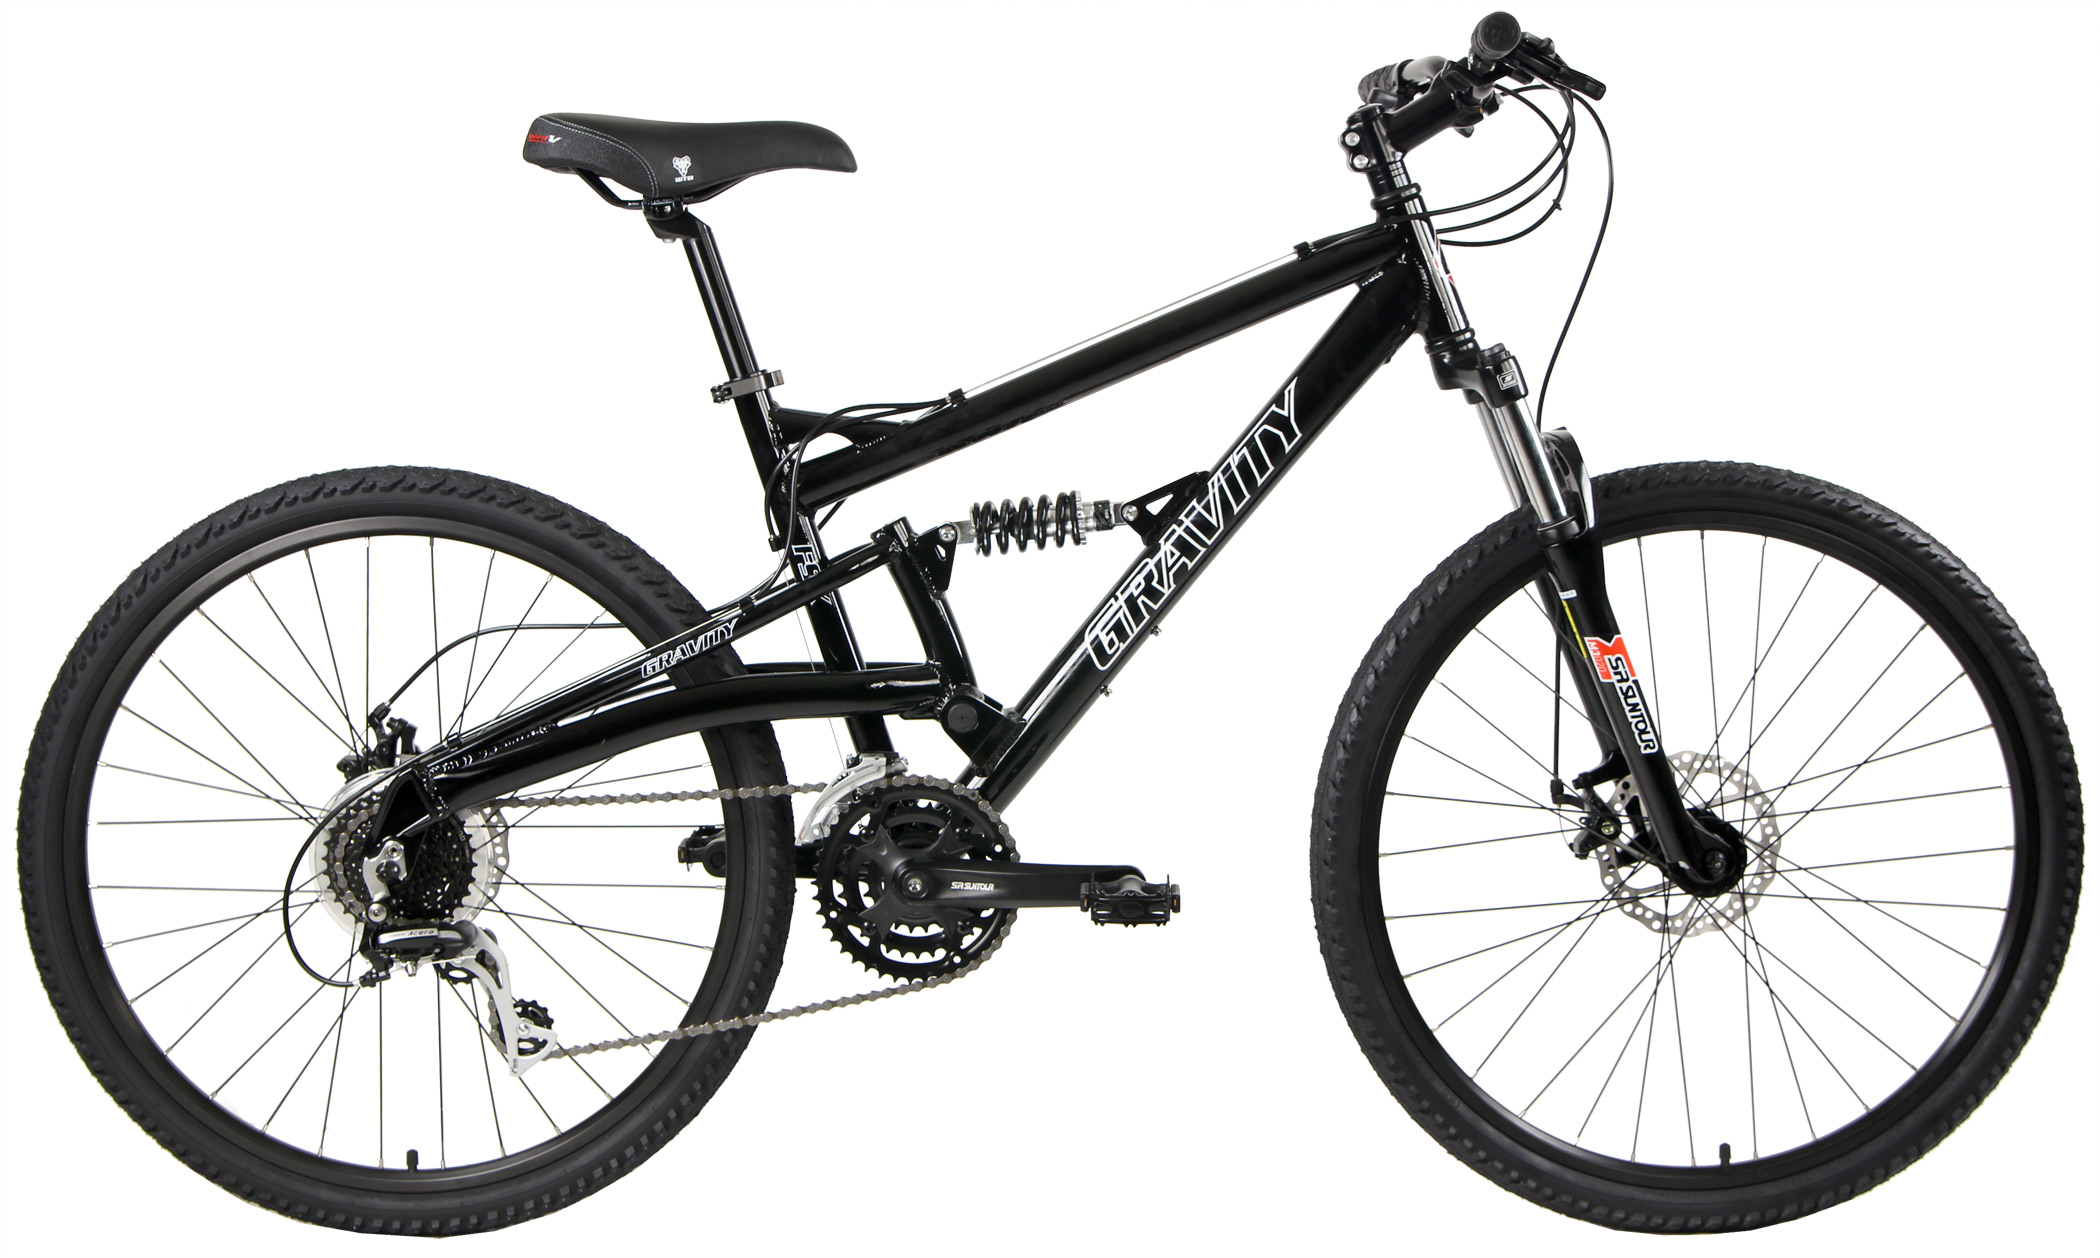 Save up to 60% off new Mountain Bikes - MTB - Full Suspension Gravity